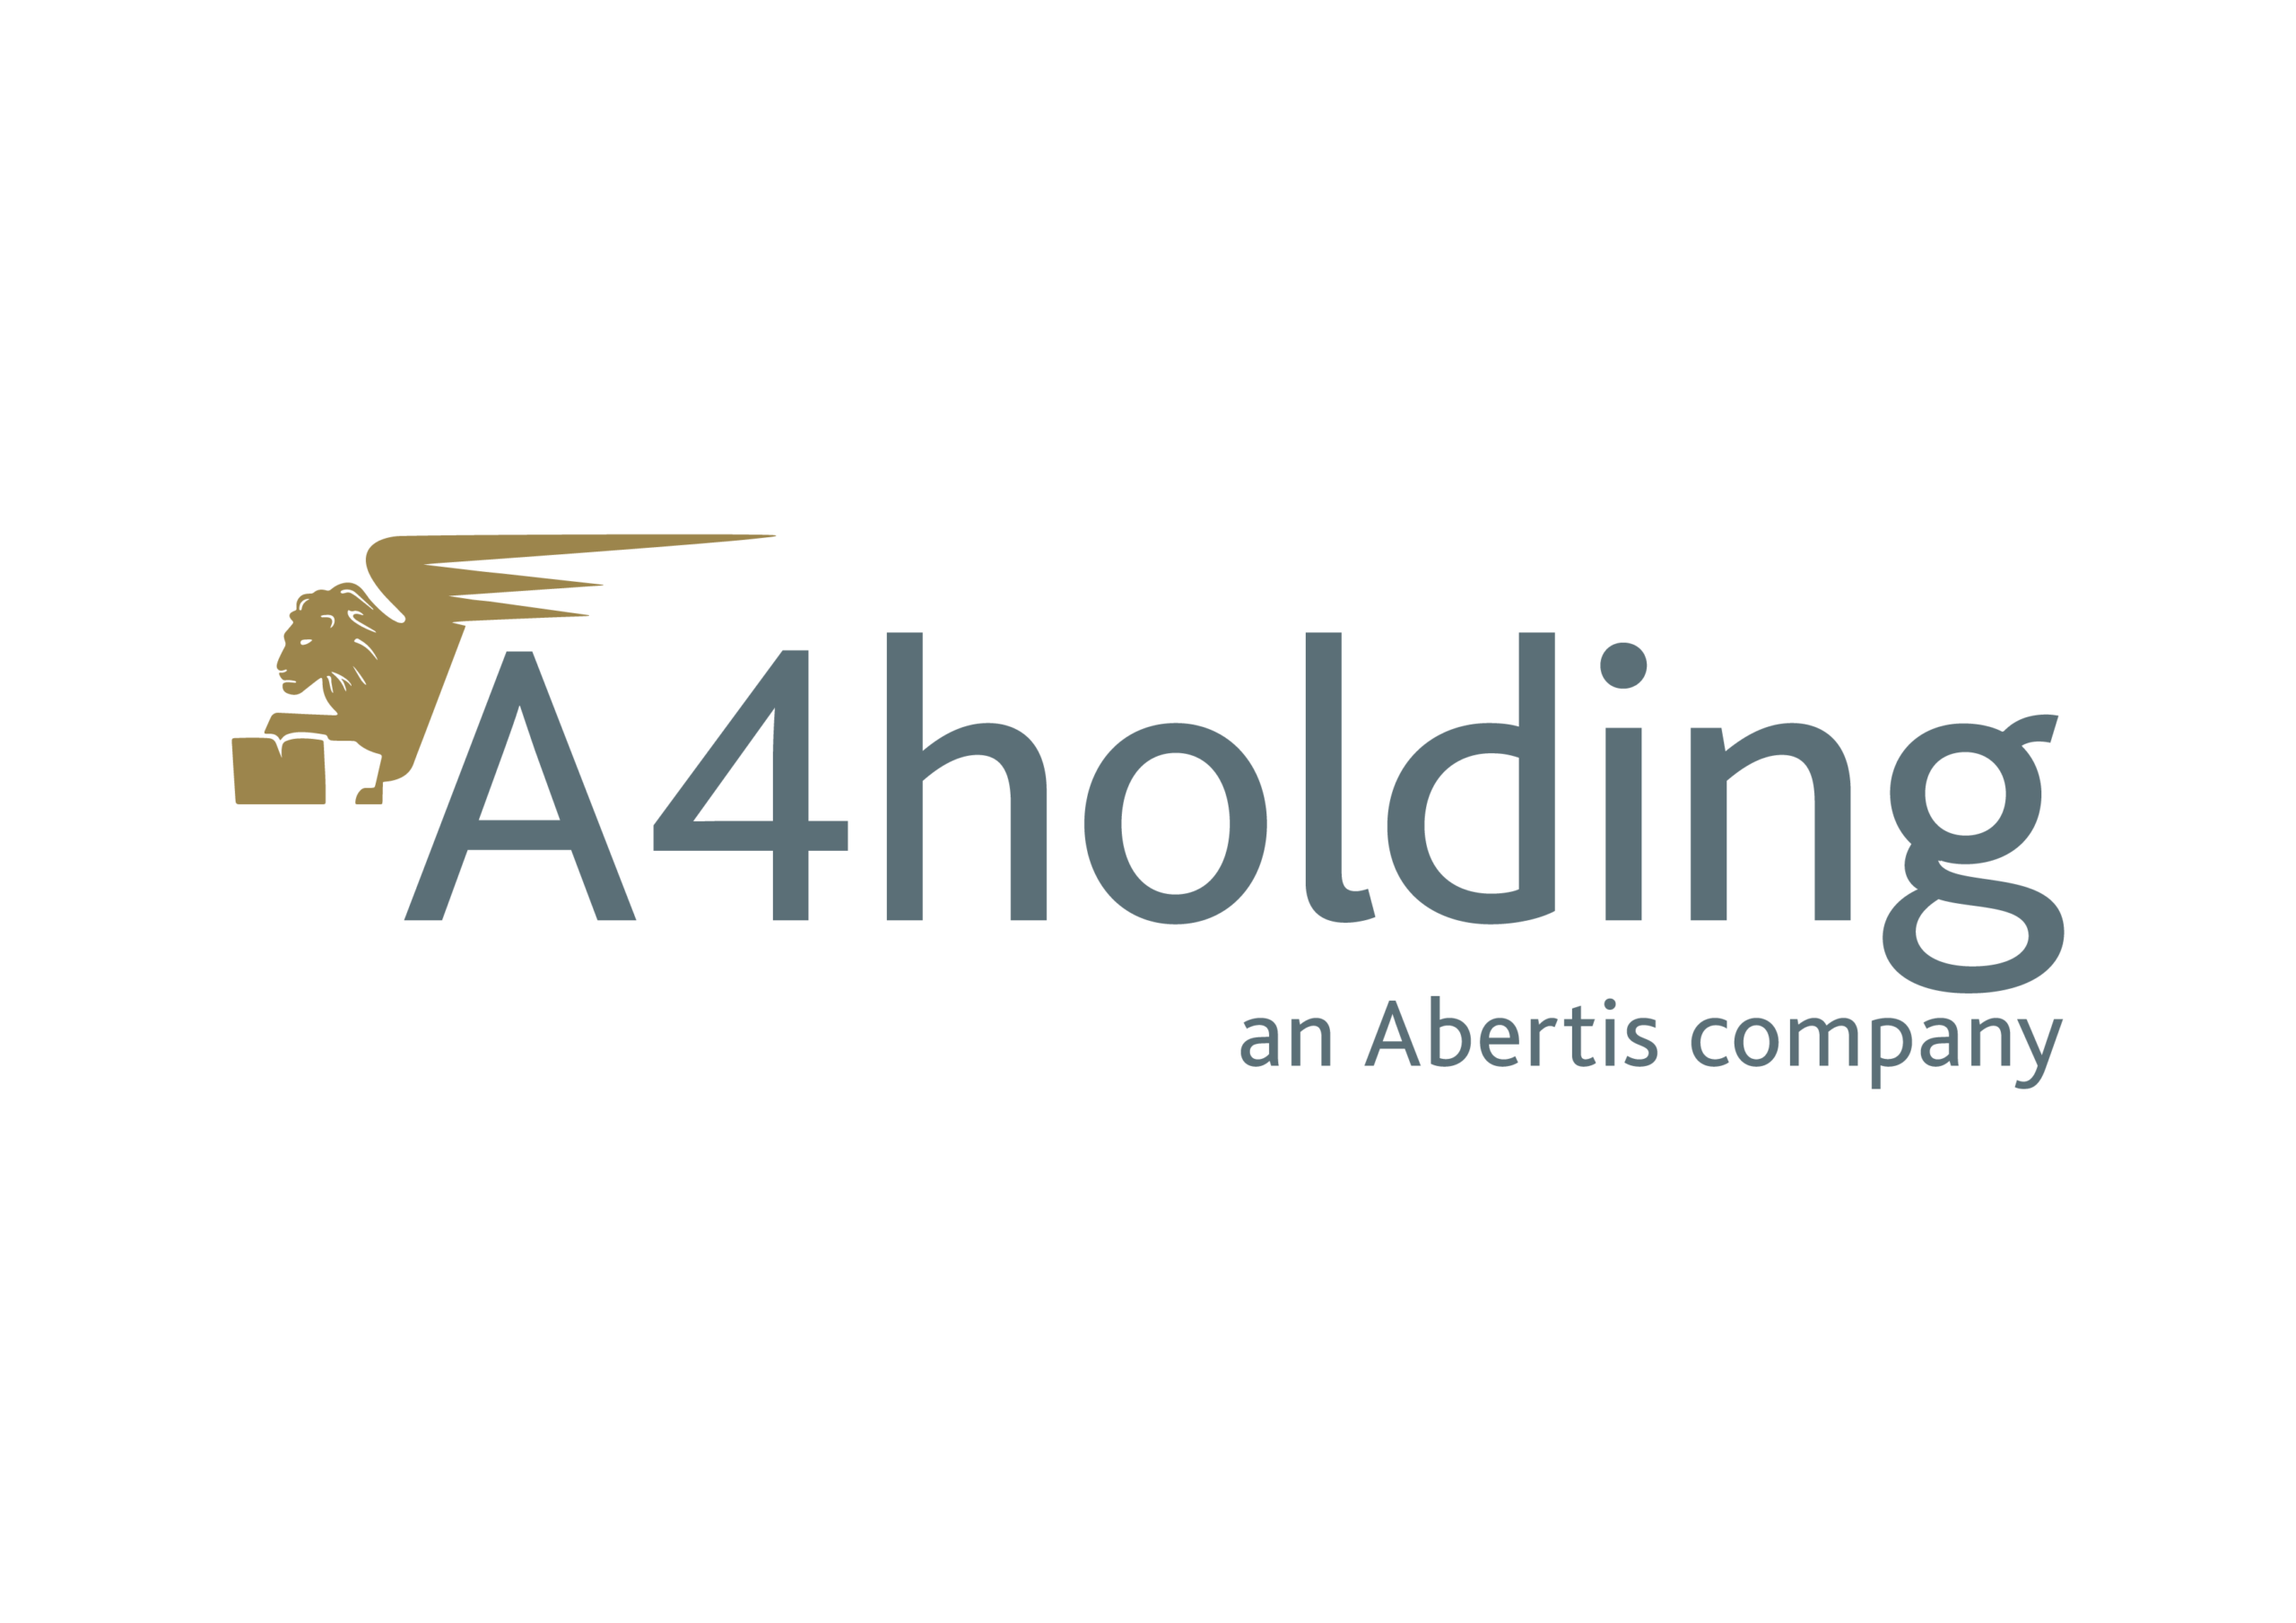 A4 HOLDING